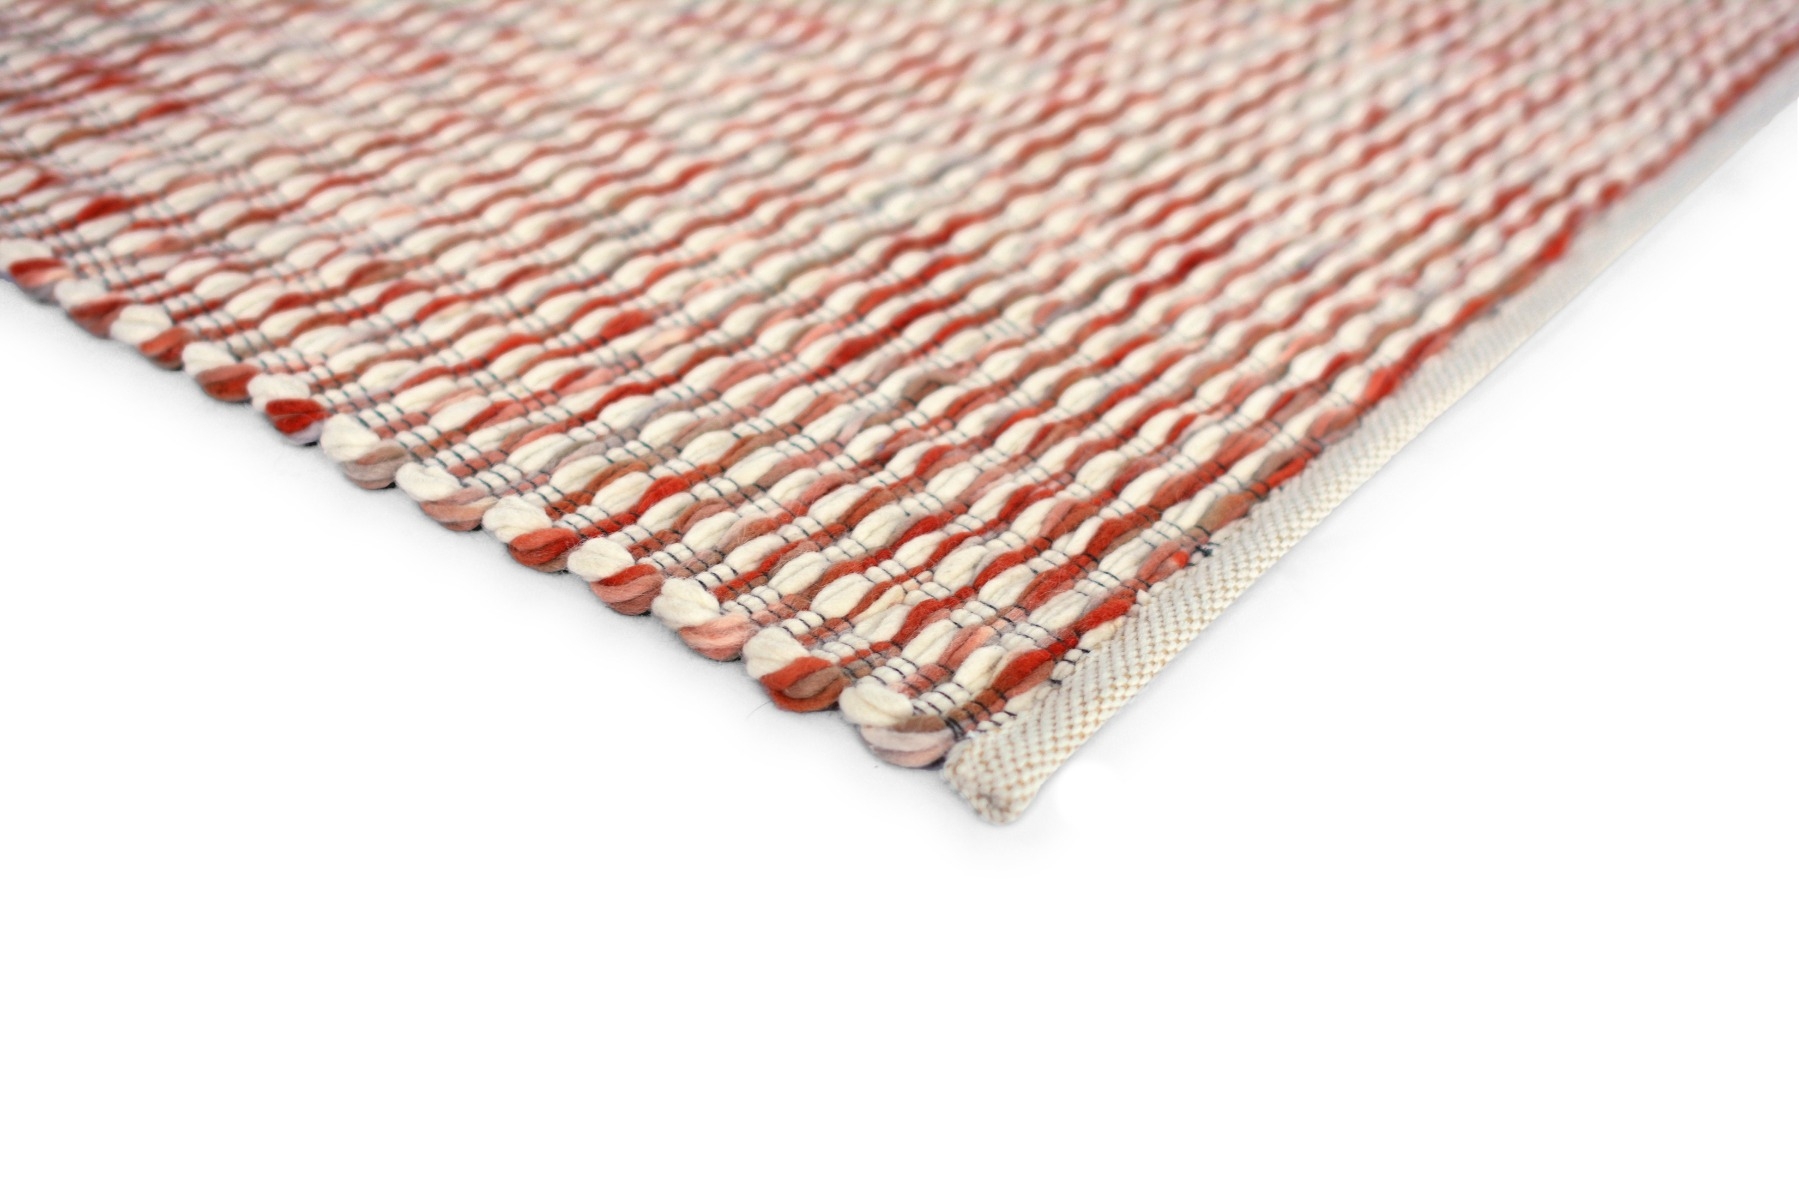 Crystal Handwoven Red Rug ☞ Size: 200 x 280 cm